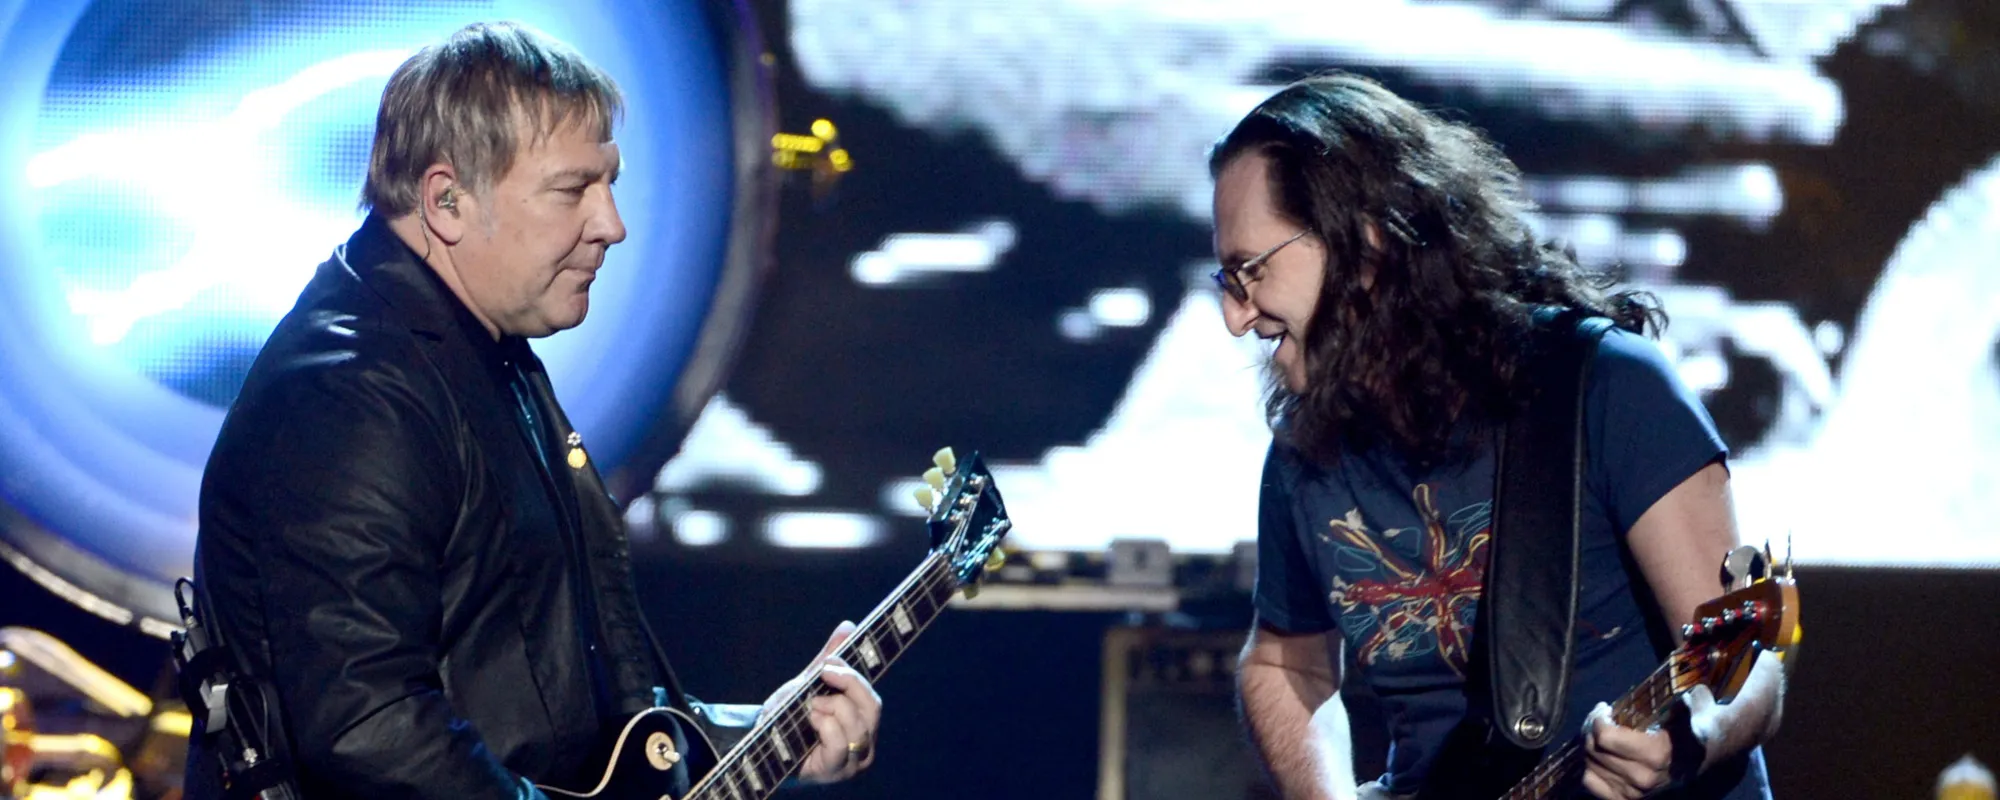 “We Have Assumed Control”: The Otherworldly Meaning of “2112” by Rush